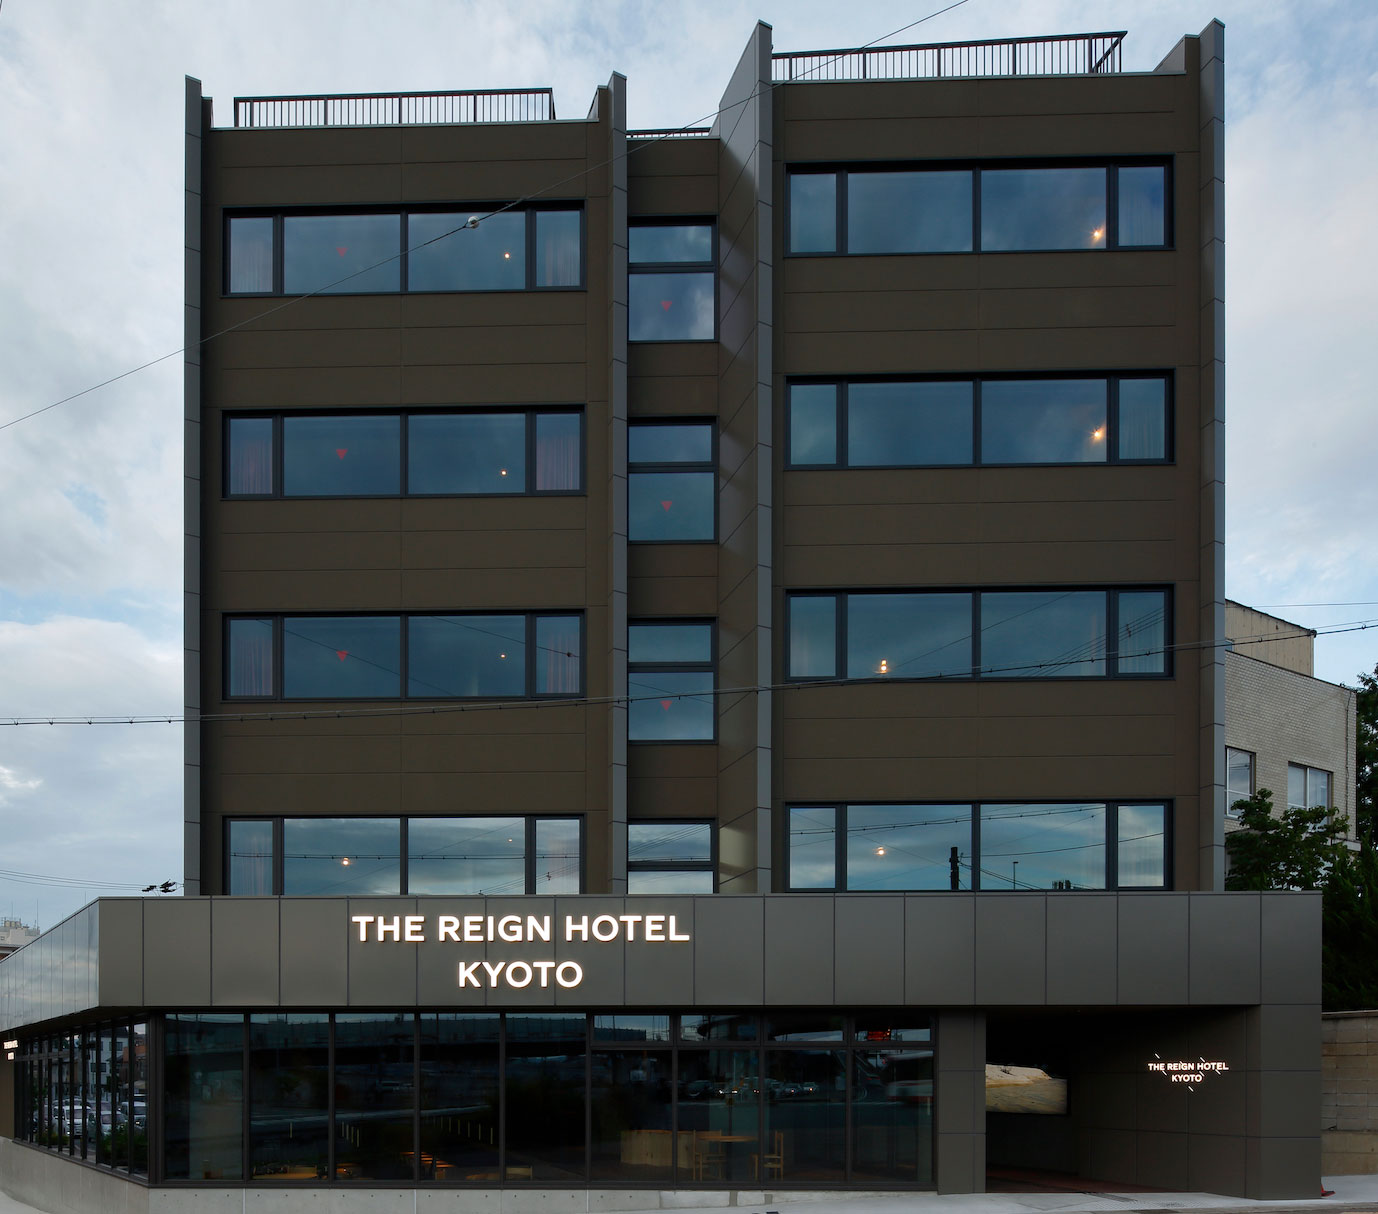 THE REIGN HOTEL KYOTO の外観